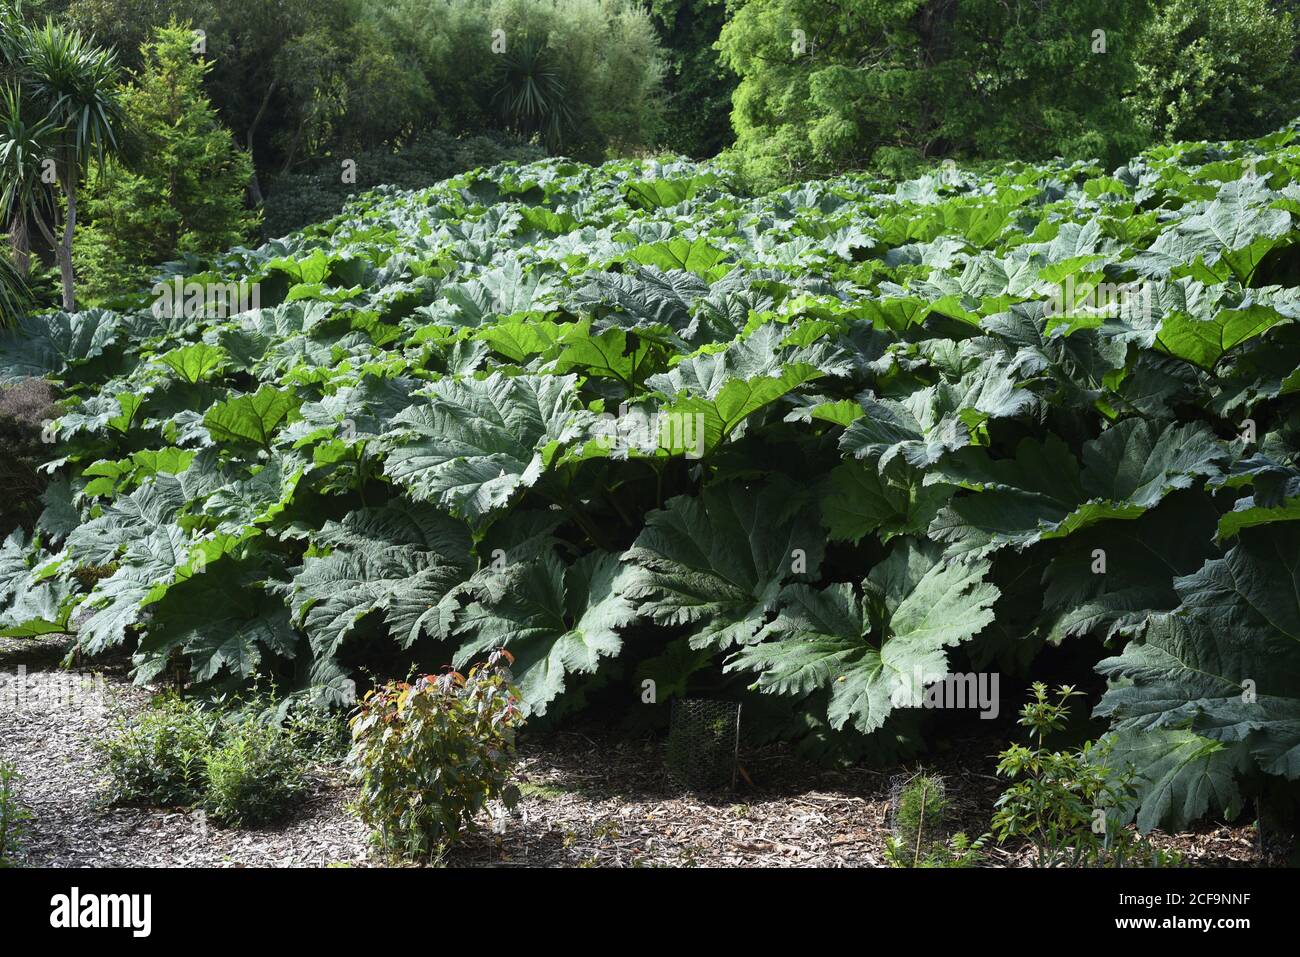 Gunnera tinctoria, known as giant rhubarb or Chilean rhubarb, is a flowering plant species native to southern Chile and neighbouring zones in Argentin Stock Photo